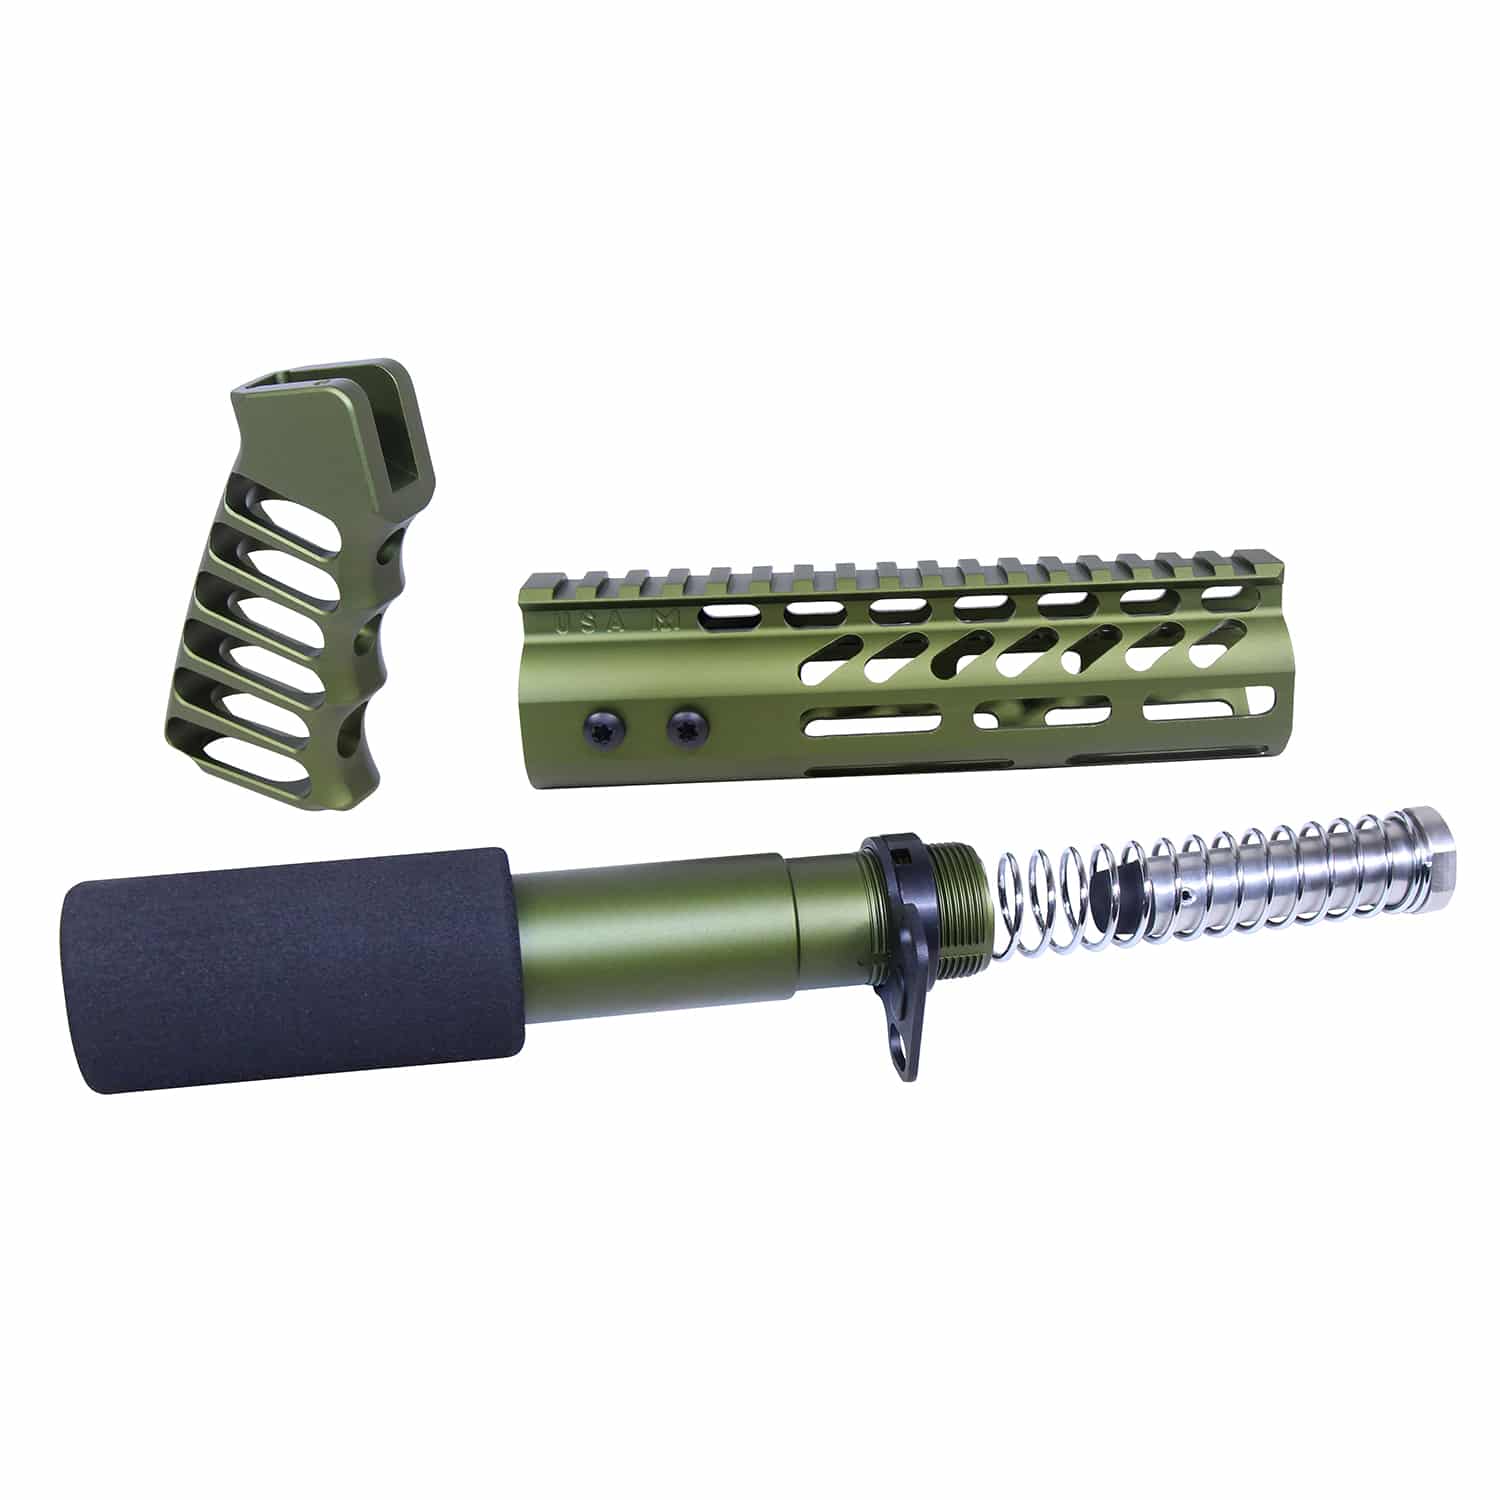 AR-15 Pistol Furniture Set In Anodized Green